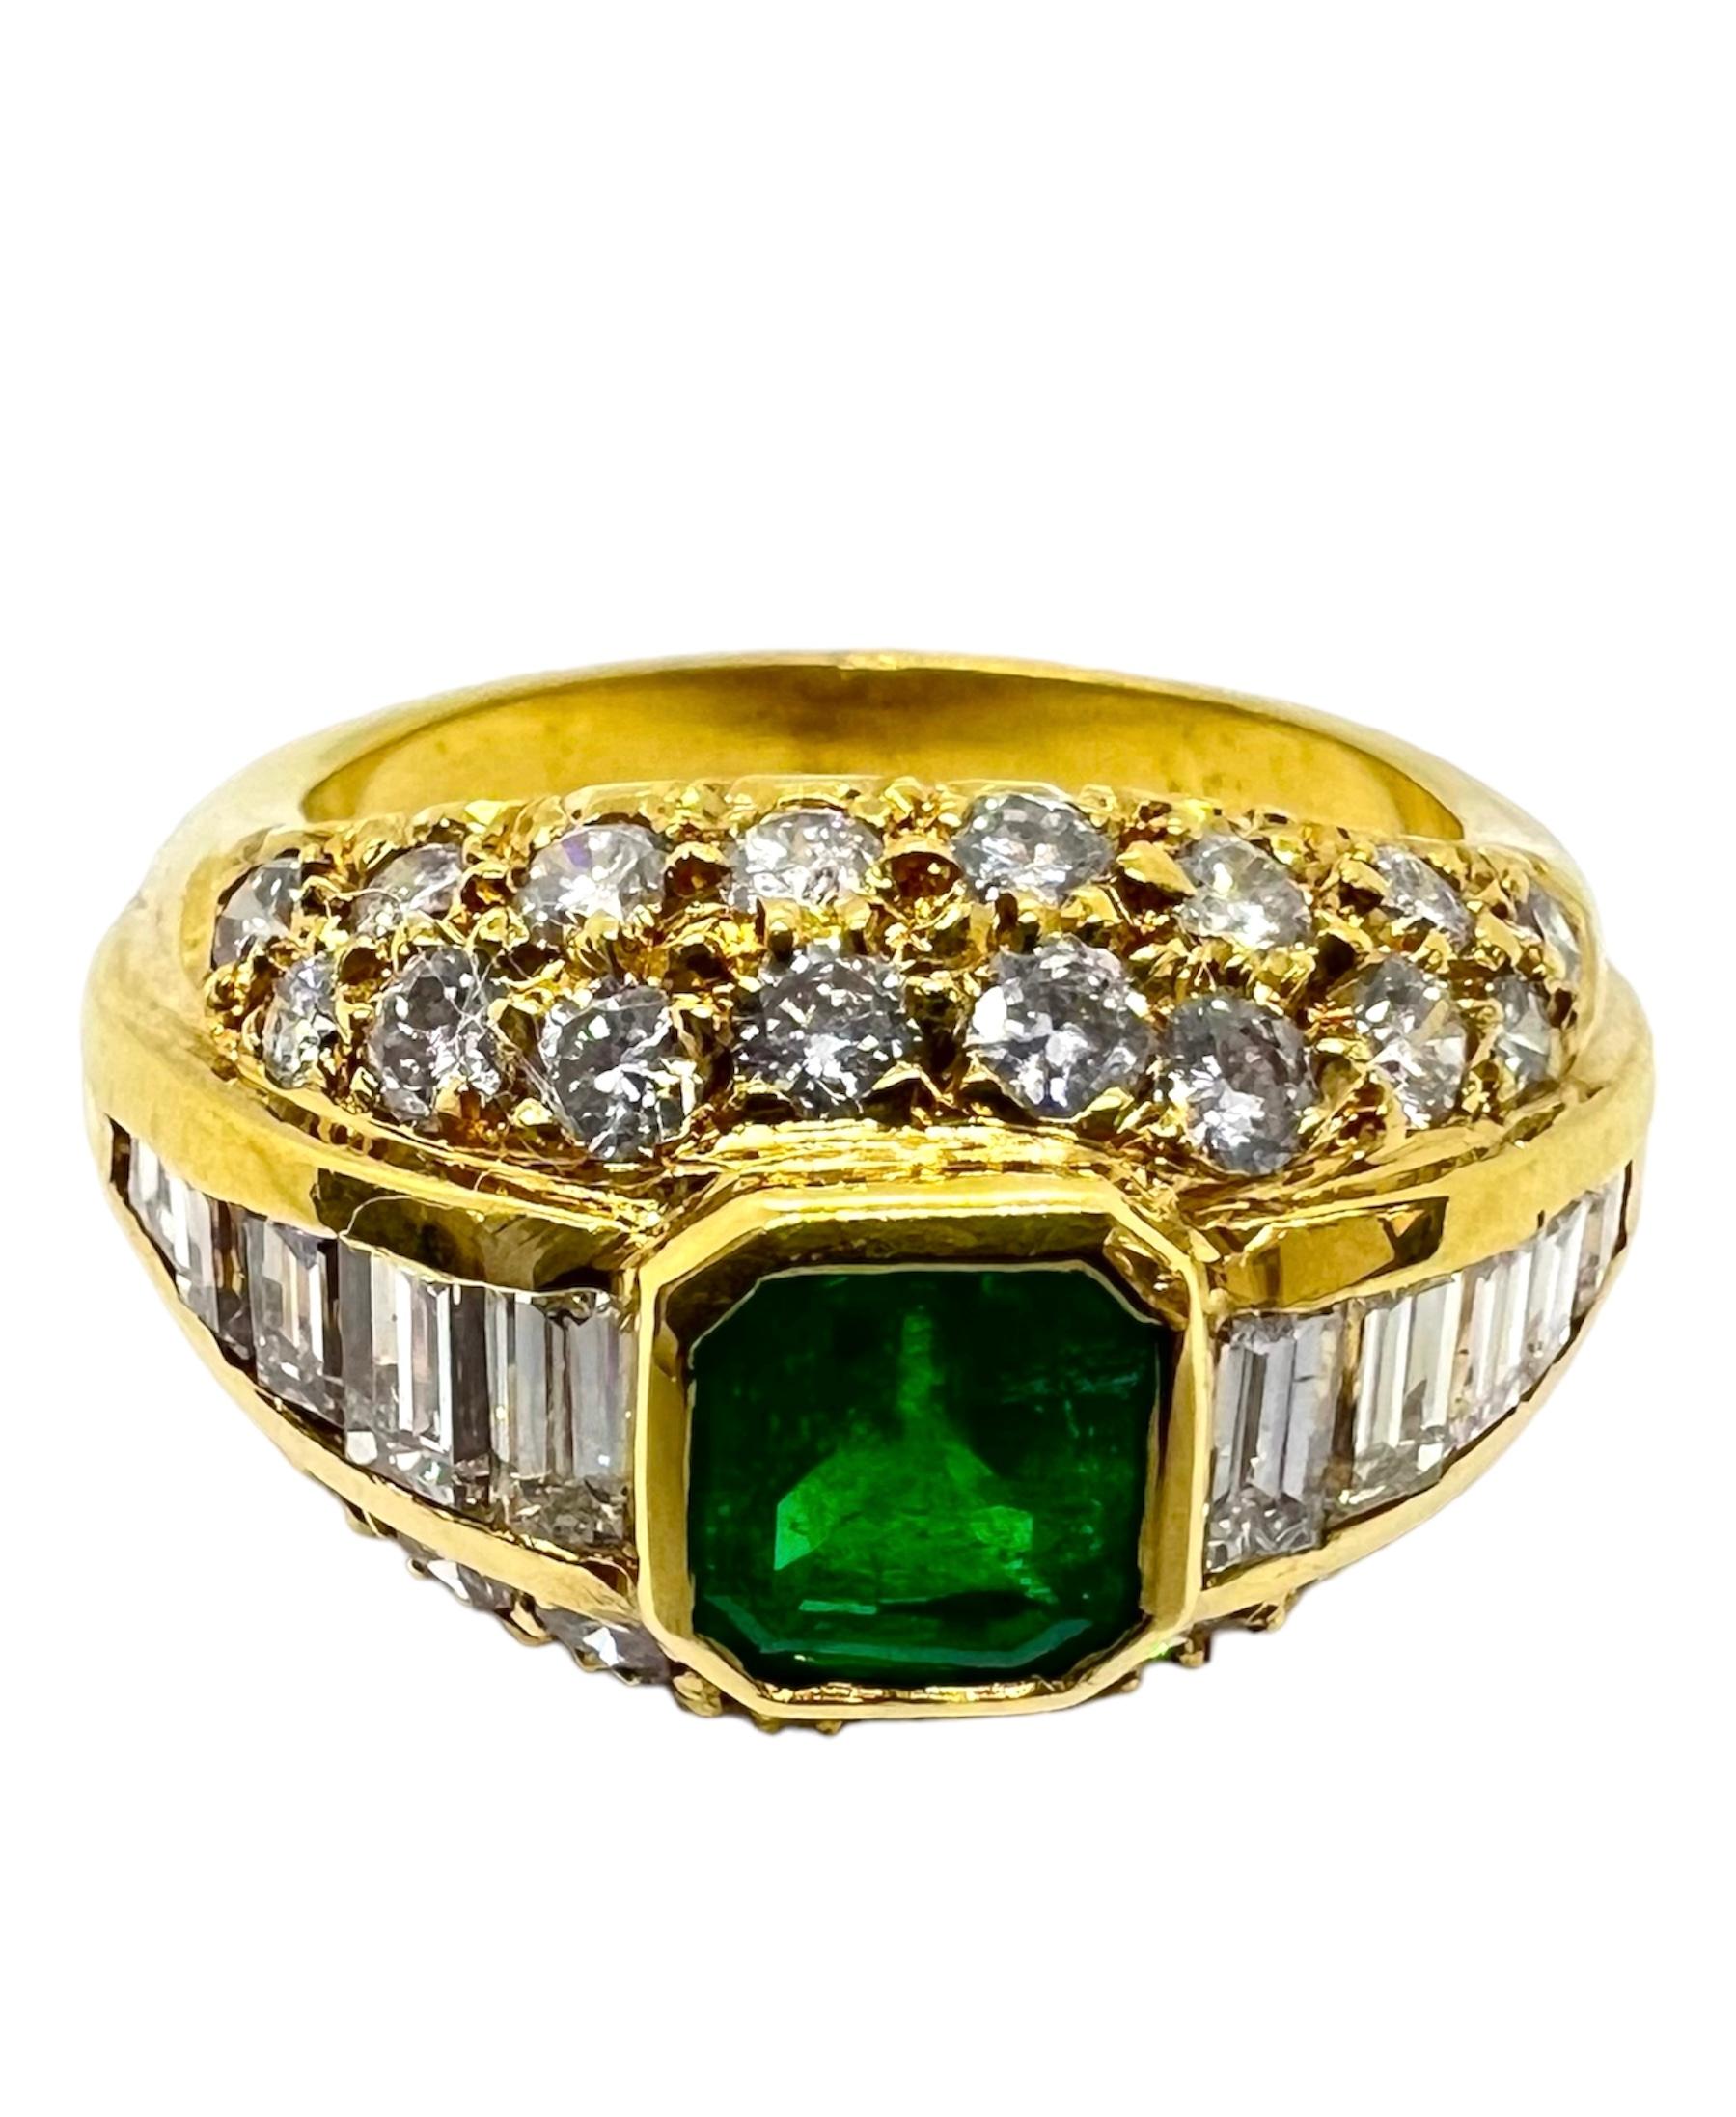 18K yellow gold ring with emerald center stone, accentuated with diamonds.

Sophia D by Joseph Dardashti LTD has been known worldwide for 35 years and are inspired by classic Art Deco design that merges with modern manufacturing techniques.  